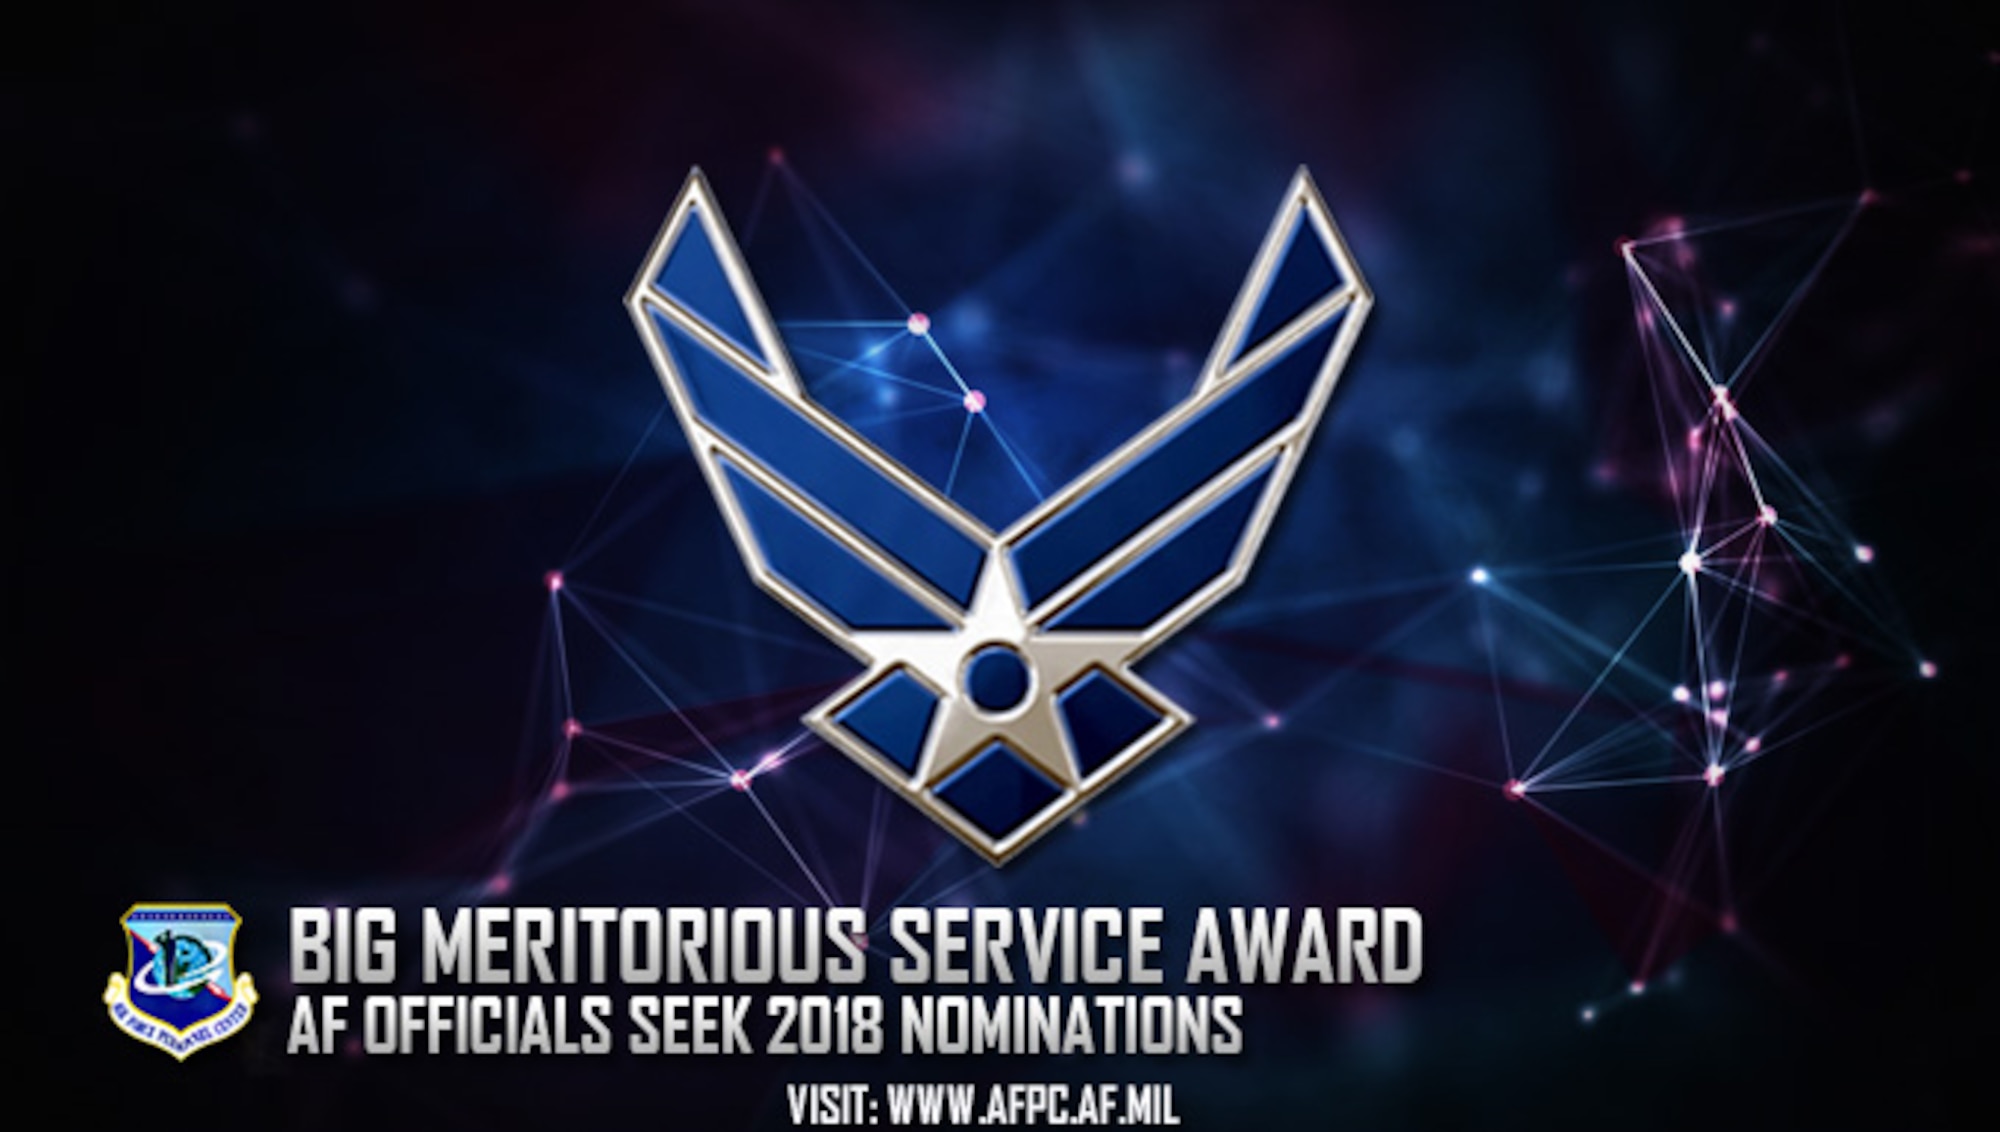 Air Force officials are currently accepting nominations for the 2018 National Blacks in Government Meritorious Service Award. Nominations are due to the Air Force’s Personnel Center by April 13. (U.S. Air Force graphic by Staff Sgt. Alexx Pons)